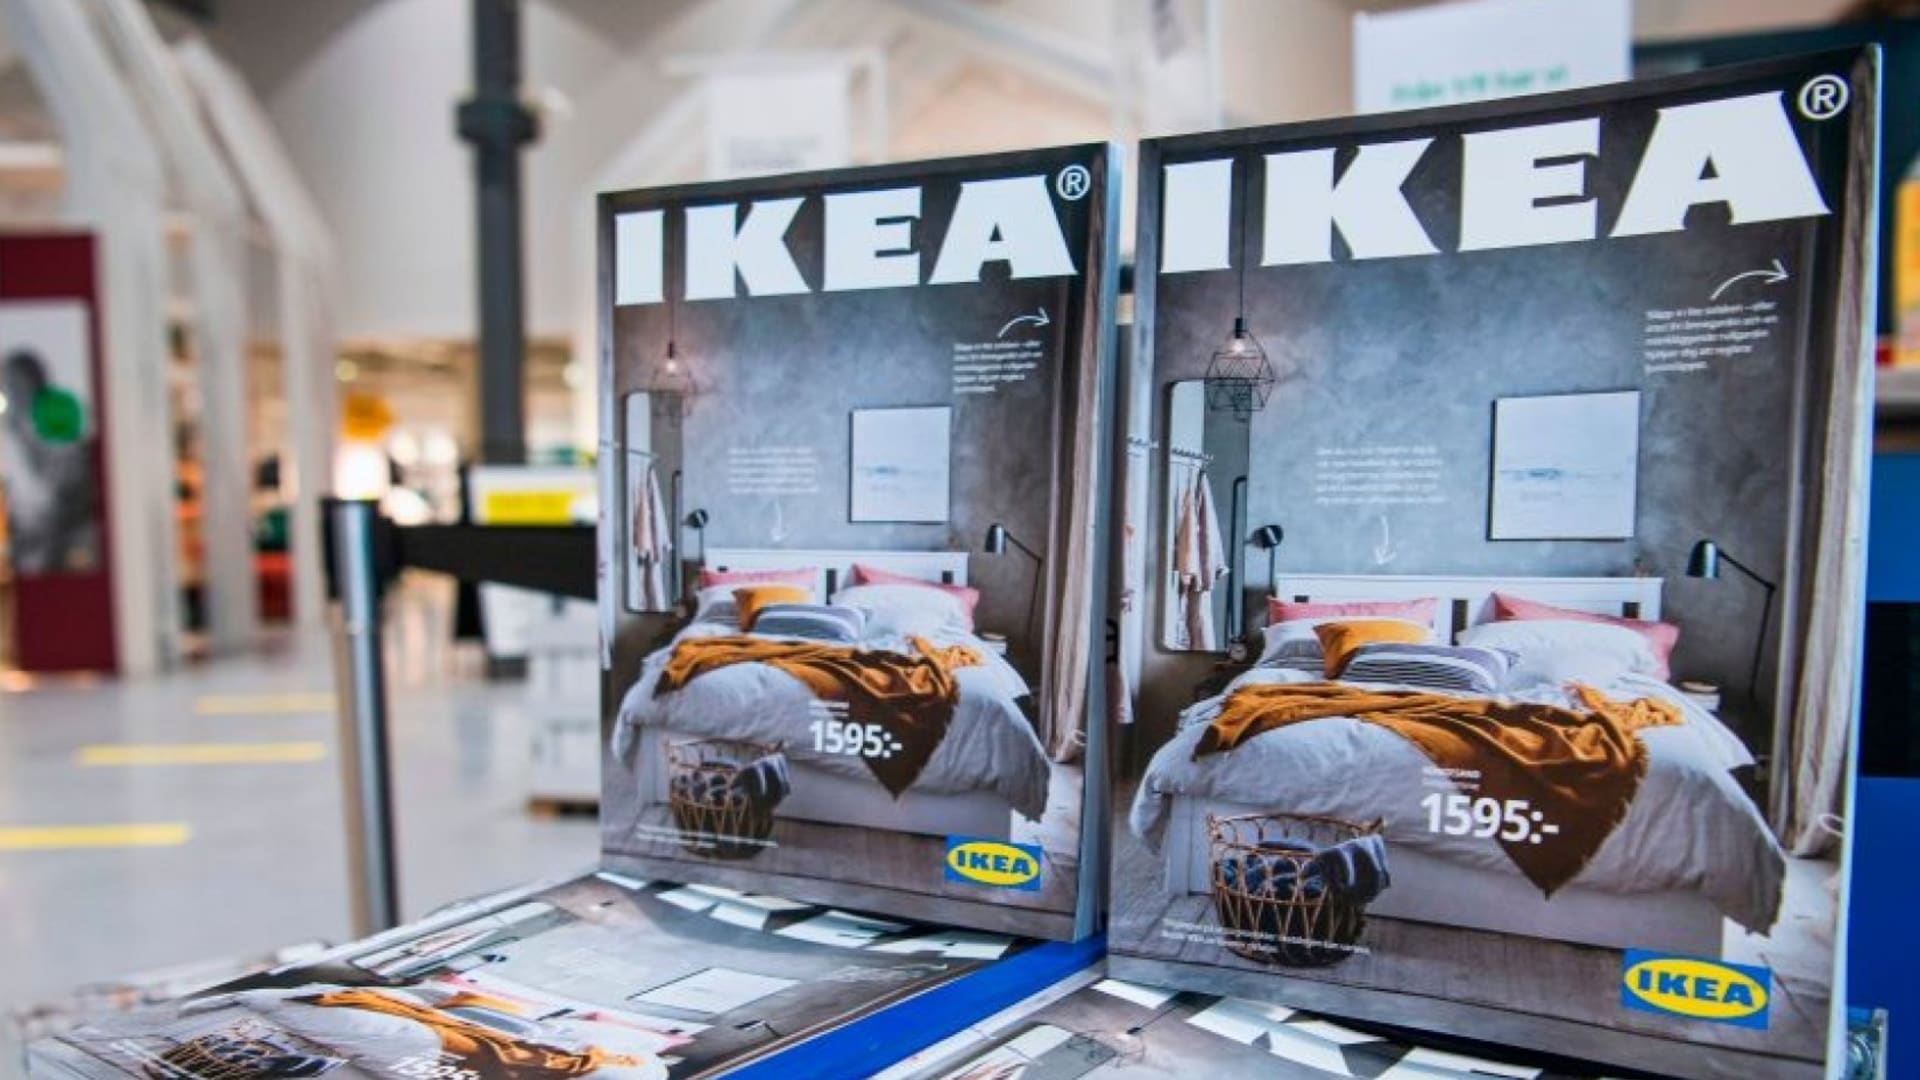 Ikea Just Quietly Killed Its Famous Catalog. It's a Brilliant Lesson in Emotional Intelligence